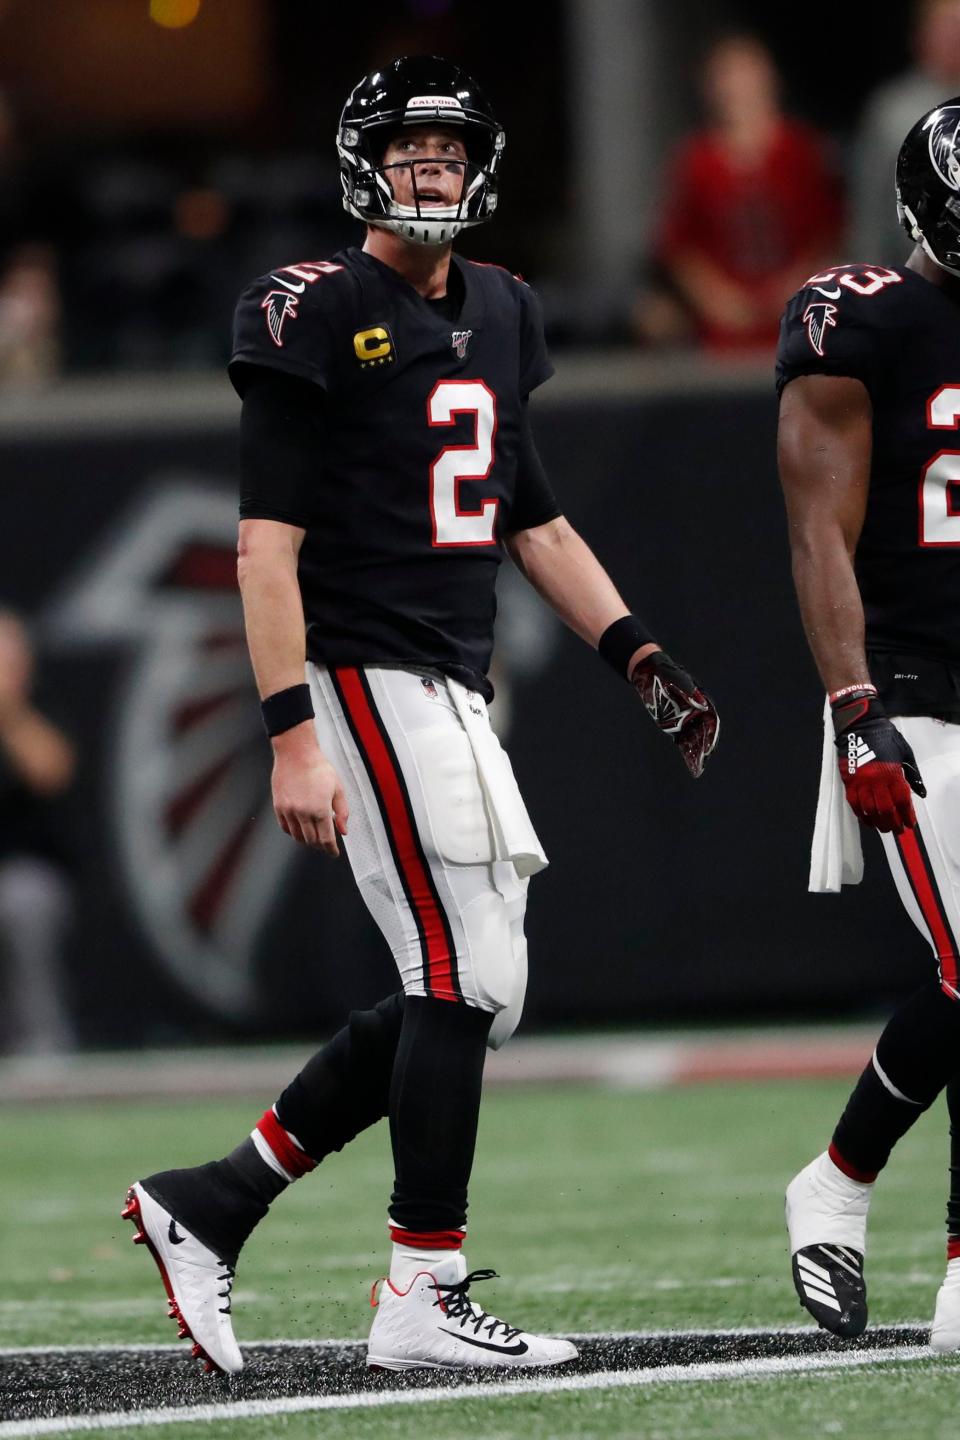 <p>
              Atlanta Falcons quarterback Matt Ryan (2) leaves the field during the second half of an NFL football game against the New Orleans Saints, Thursday, Nov. 28, 2019, in Atlanta. The New Orleans Saints won 26-18. (AP Photo/John Bazemore)
            </p>